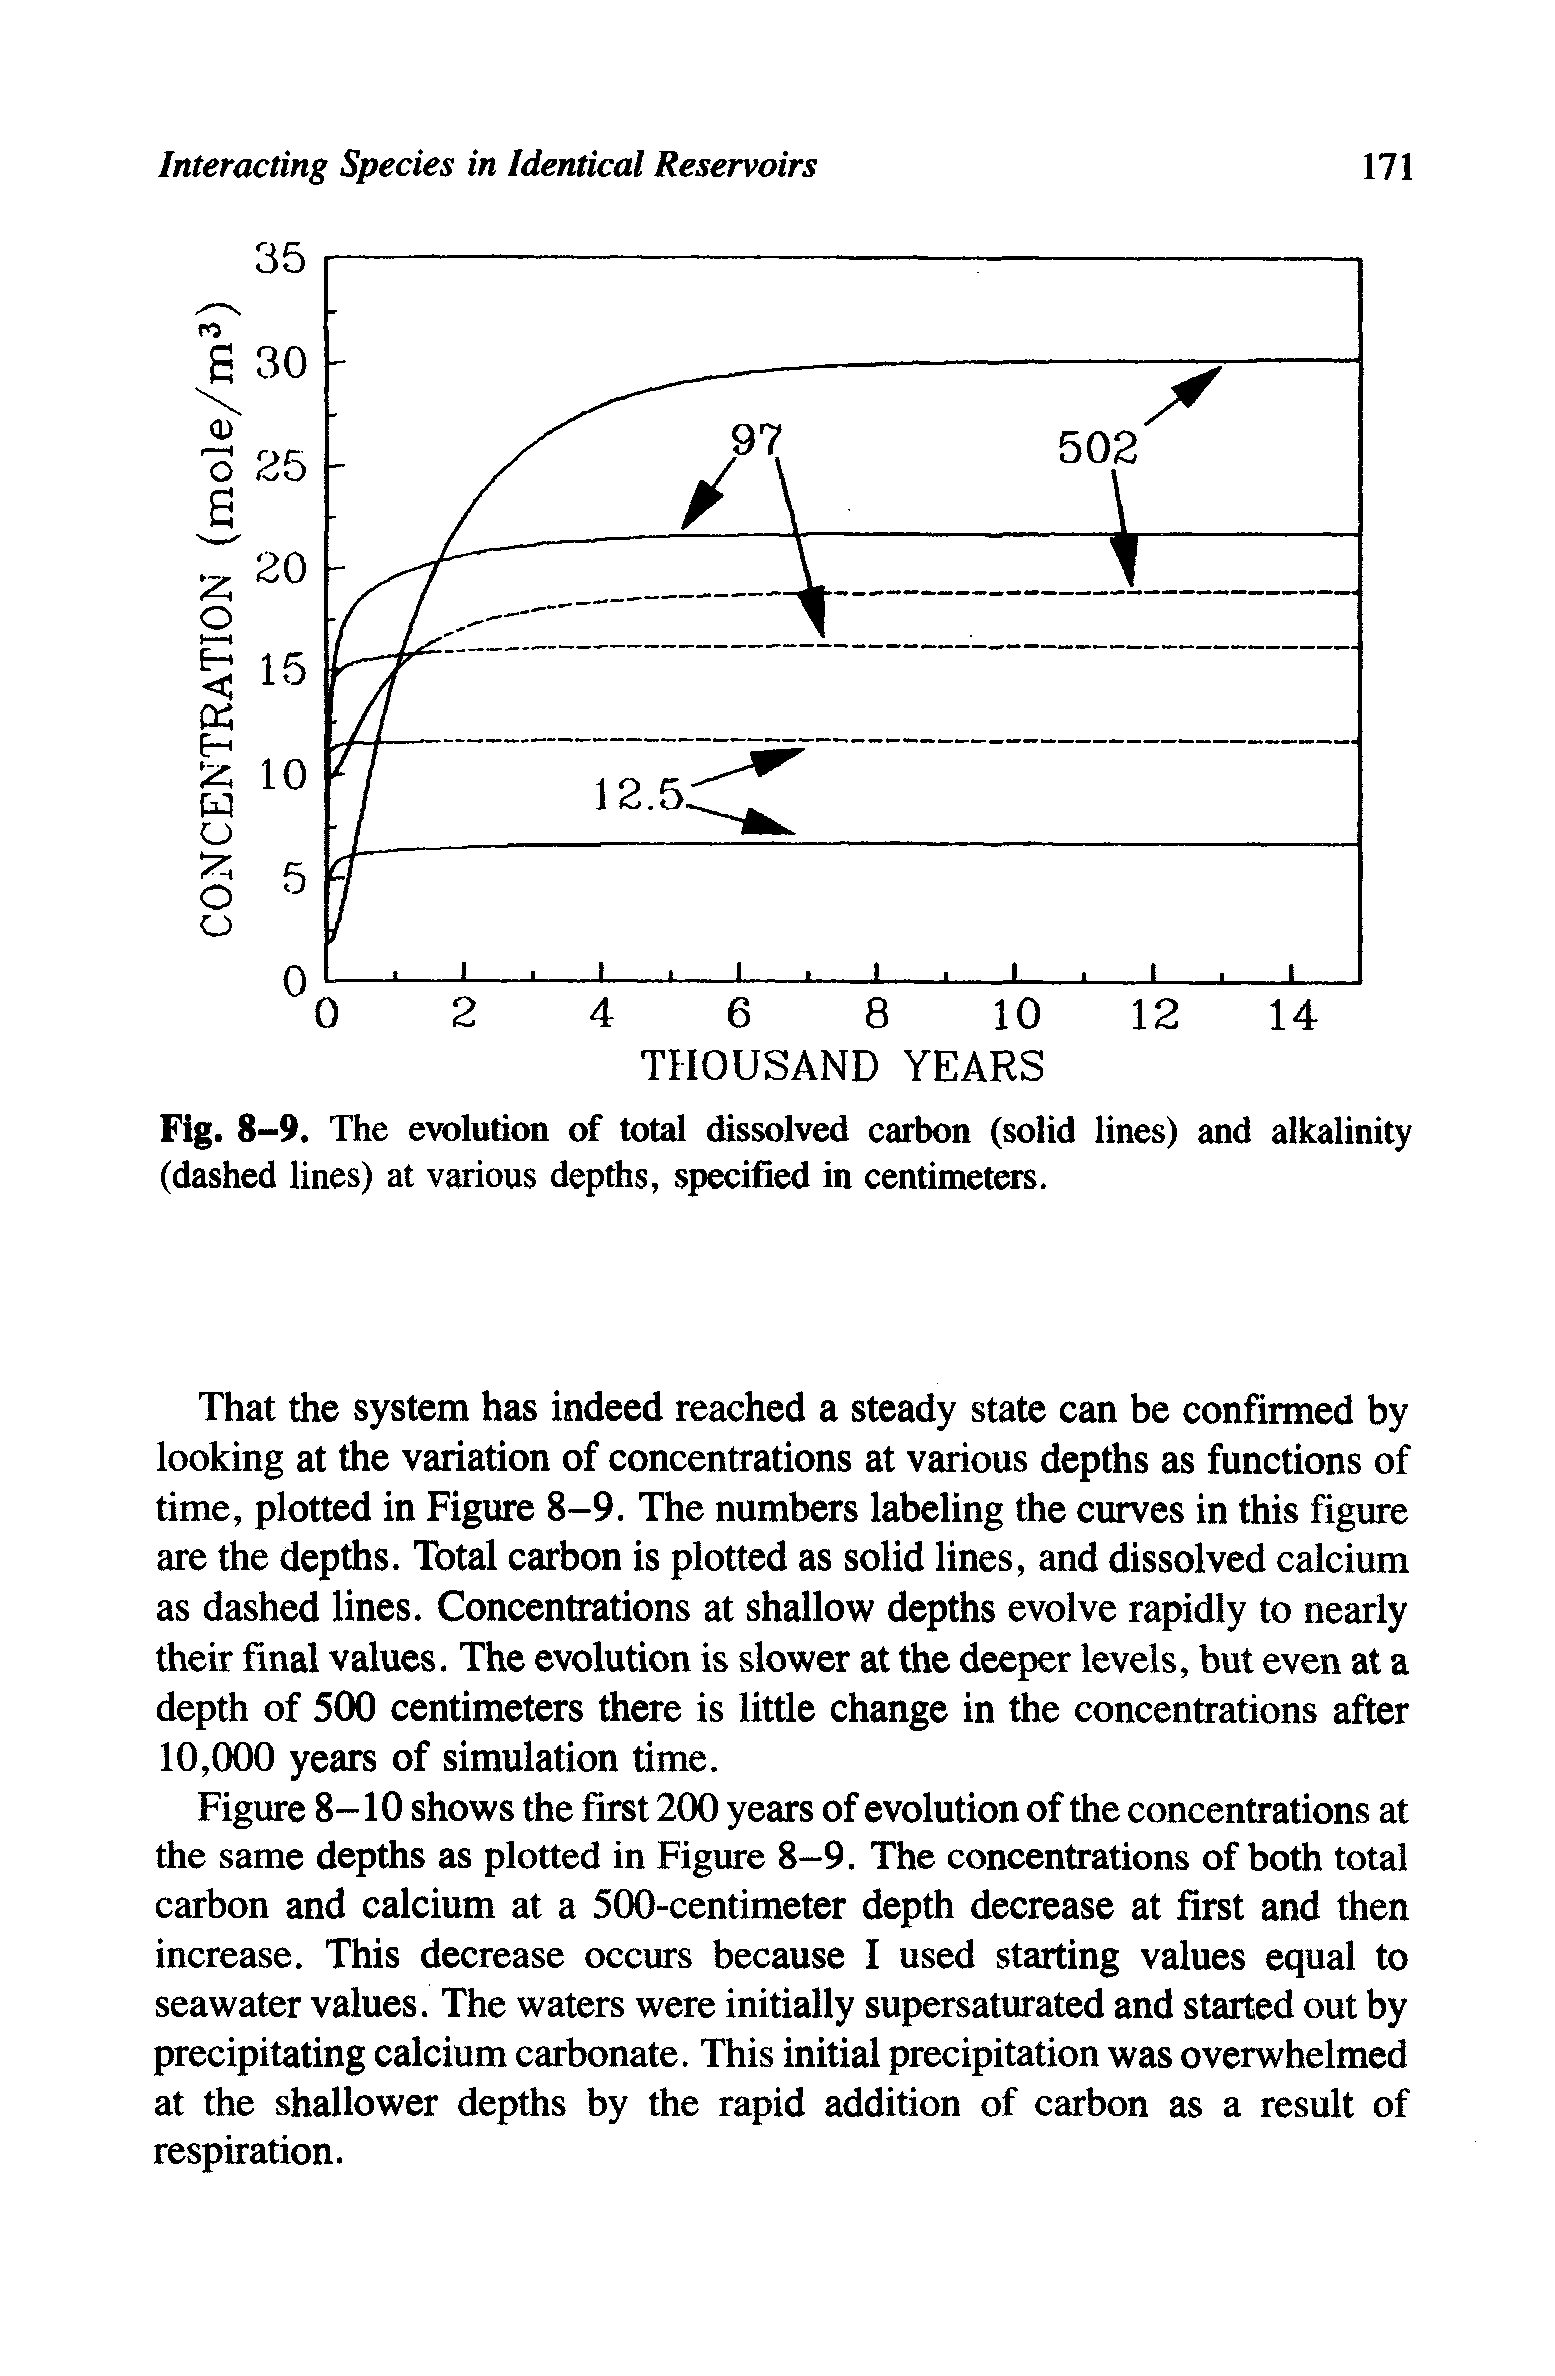 Figure 8-10 shows the first 200 years of evolution of the concentrations at the same depths as plotted in Figure 8-9. The concentrations of both total carbon and calcium at a 500-centimeter depth decrease at first and then increase. This decrease occurs because I used starting values equal to seawater values. The waters were initially supersaturated and started out by precipitating calcium carbonate. This initial precipitation was overwhelmed at the shallower depths by the rapid addition of carbon as a result of respiration.